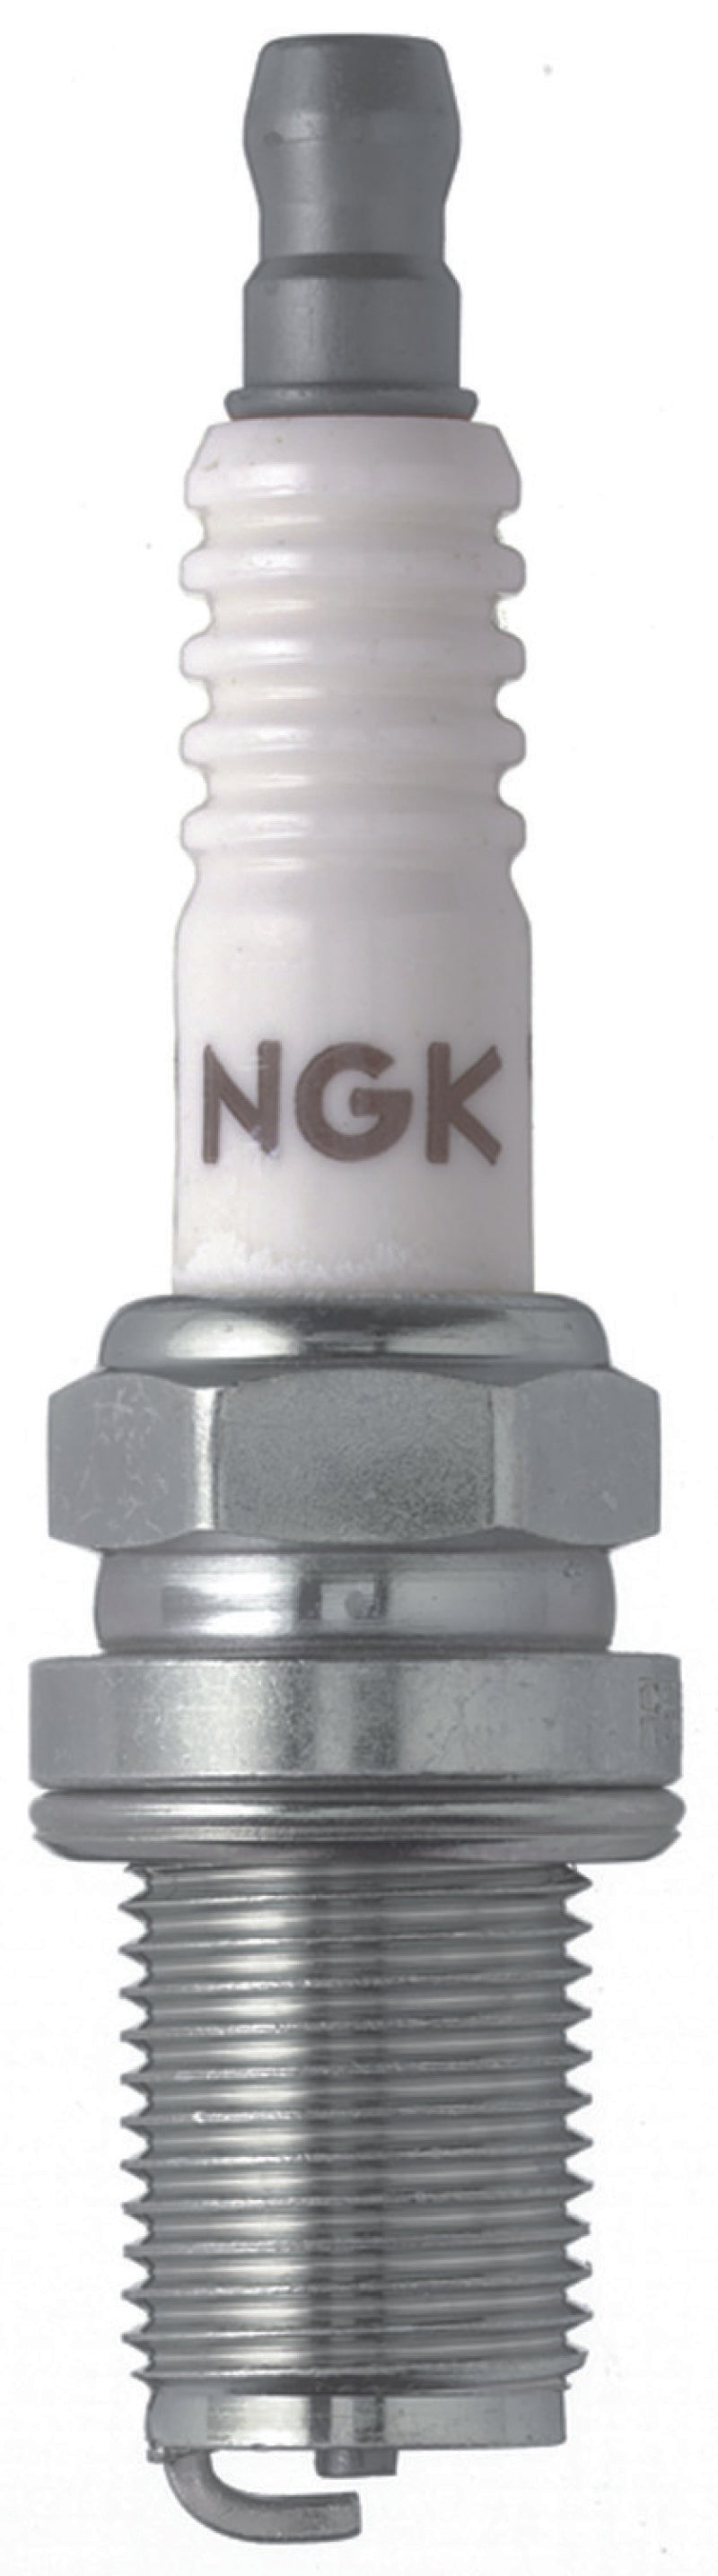 NGK Racing Spark Plug Box of 4 (R5671A-11) -  Shop now at Performance Car Parts